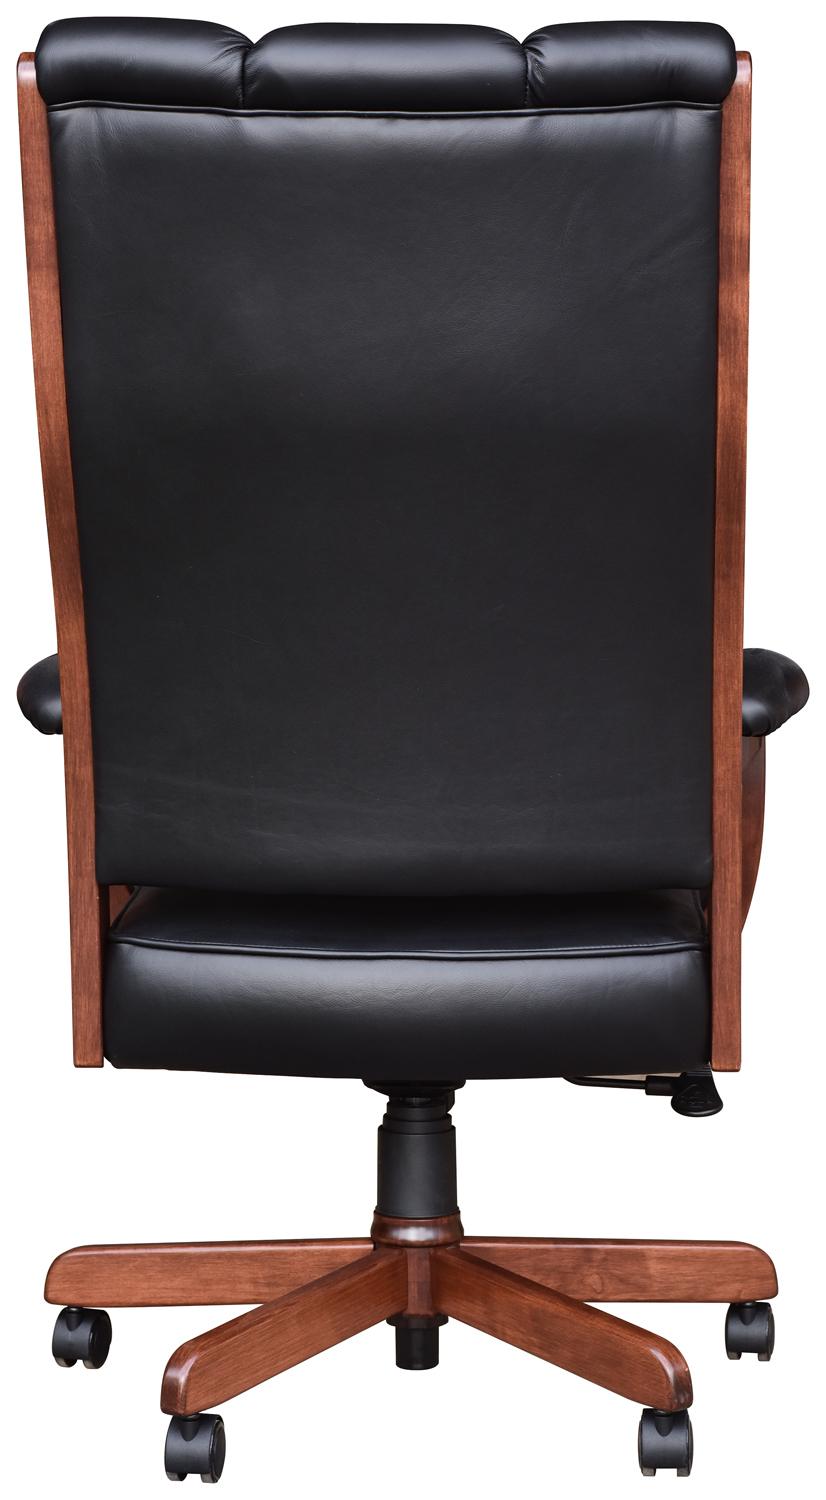 solid-wood-executive-desk-chair